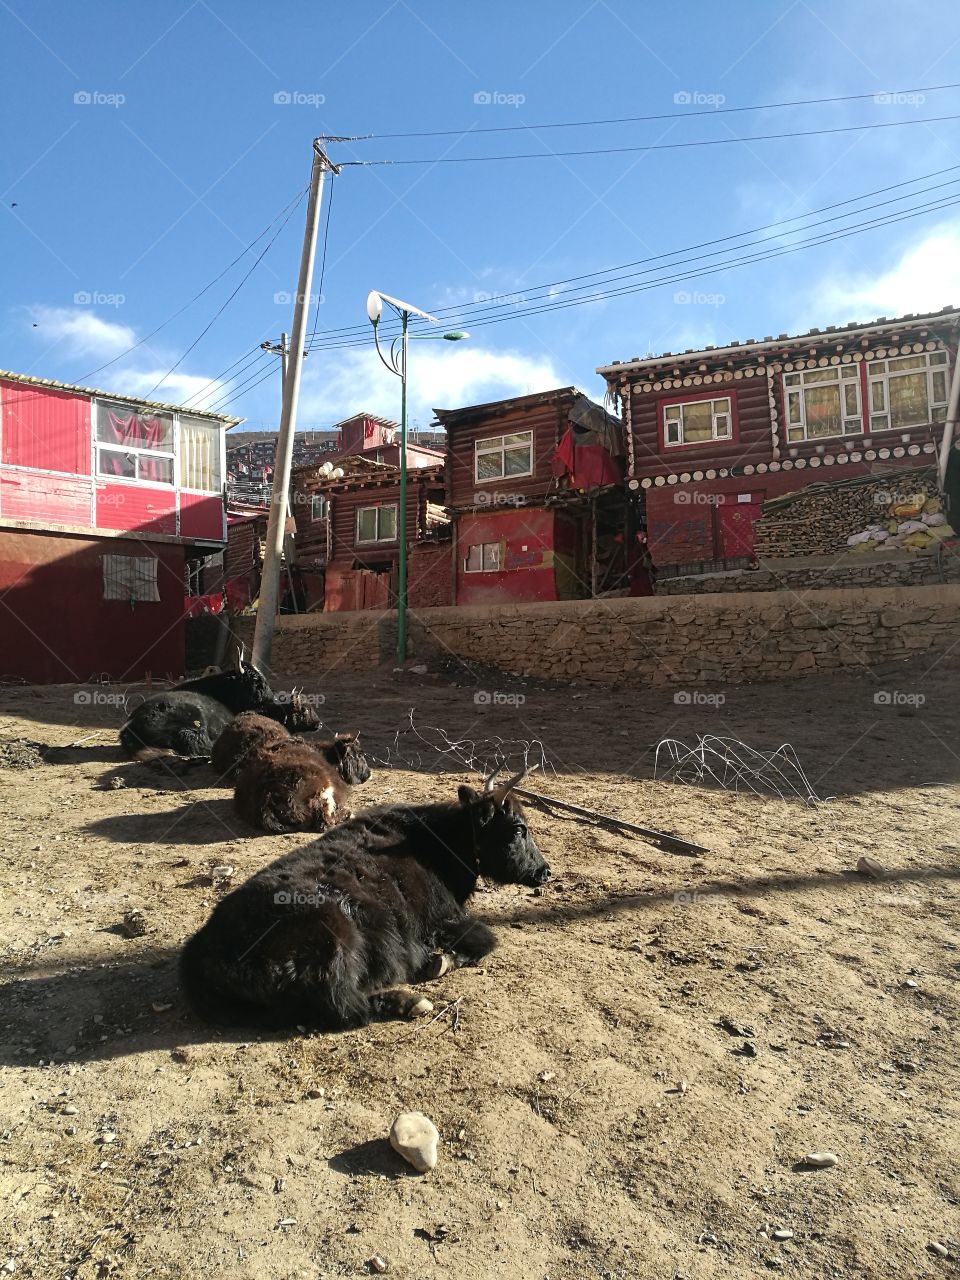 Yaks at Se Da Buddhist Monastery and School in Sichuan Province, China.

Se Da is currently the largest Tibetan Buddhist school in the world and not open to westerners